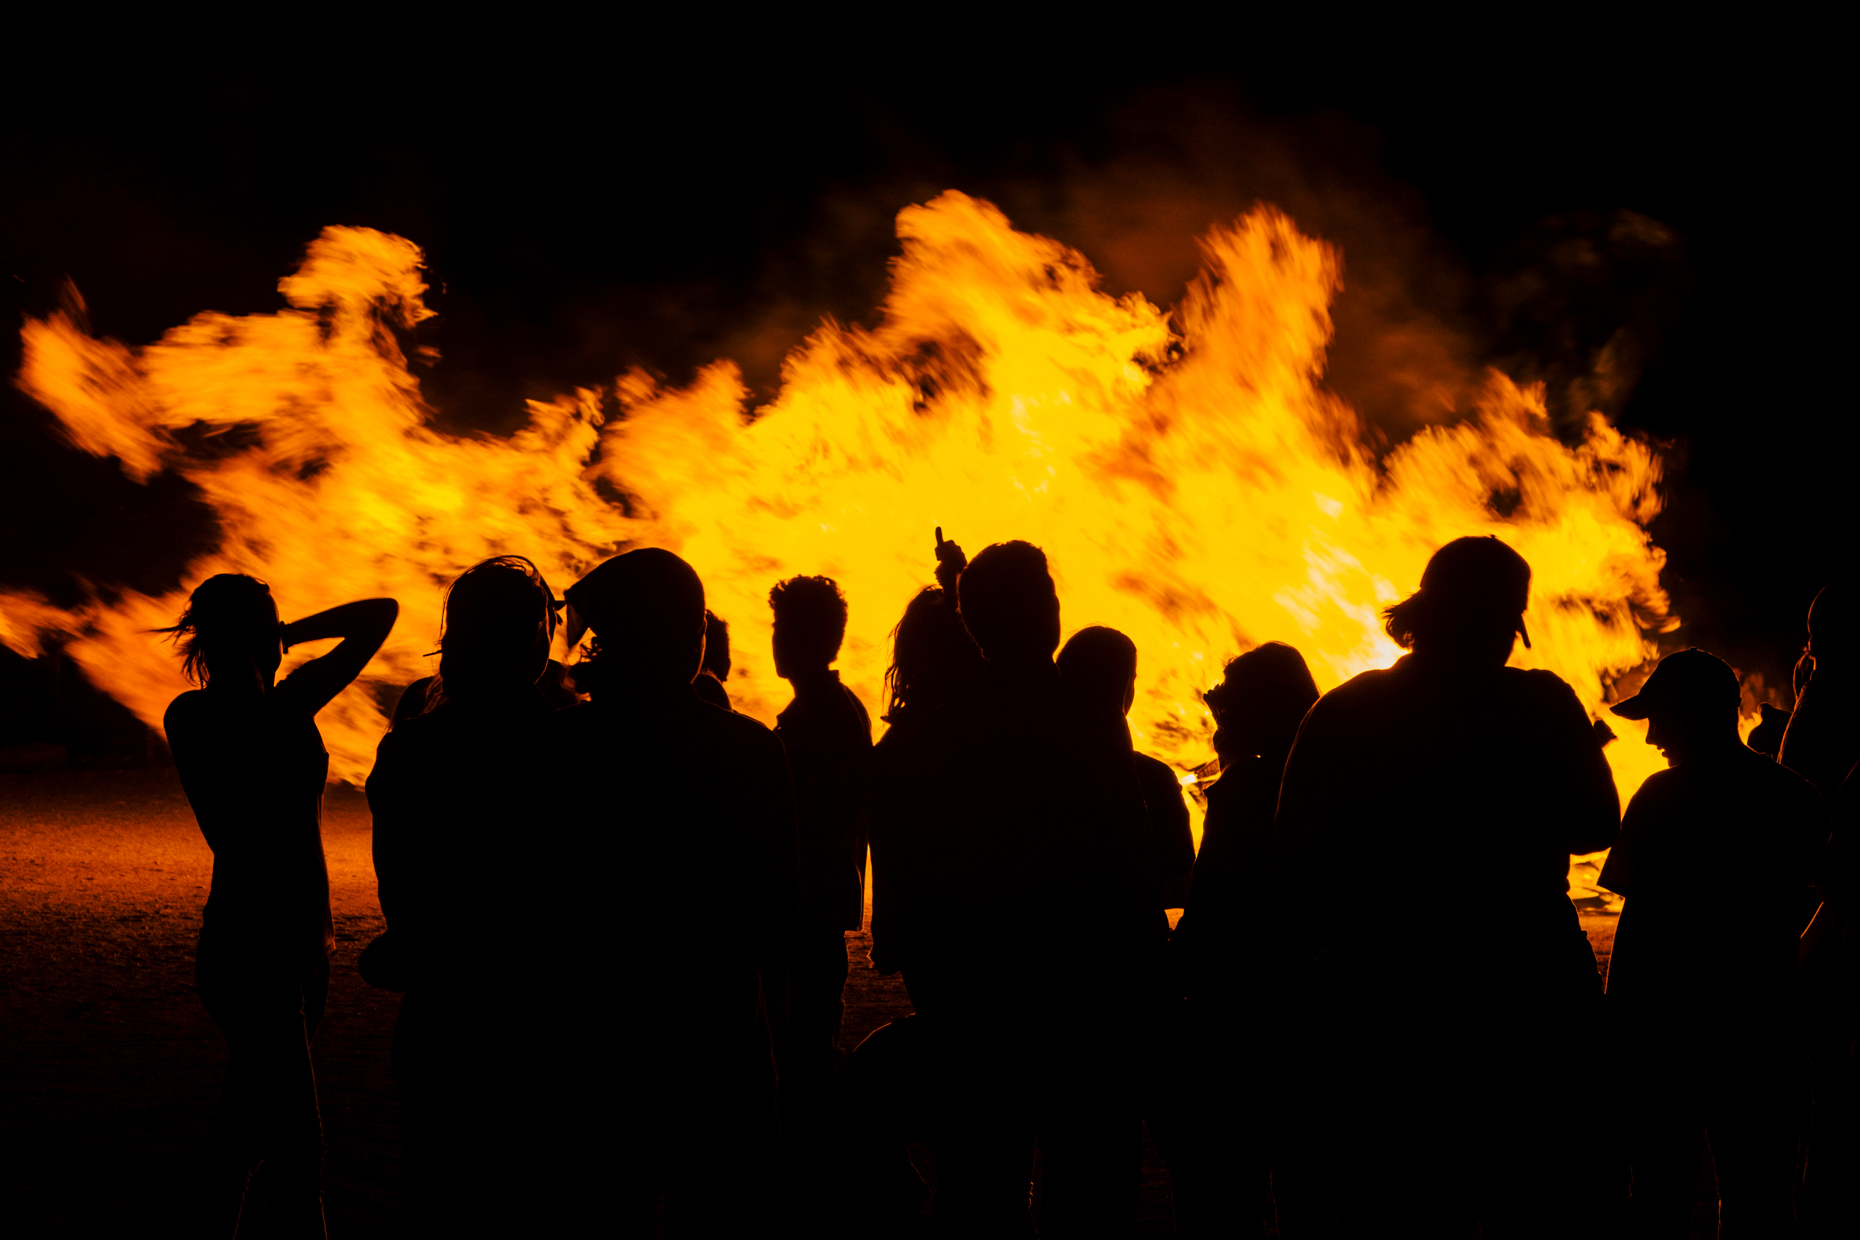 High school students gather for annual autumn pep rally and bonfire